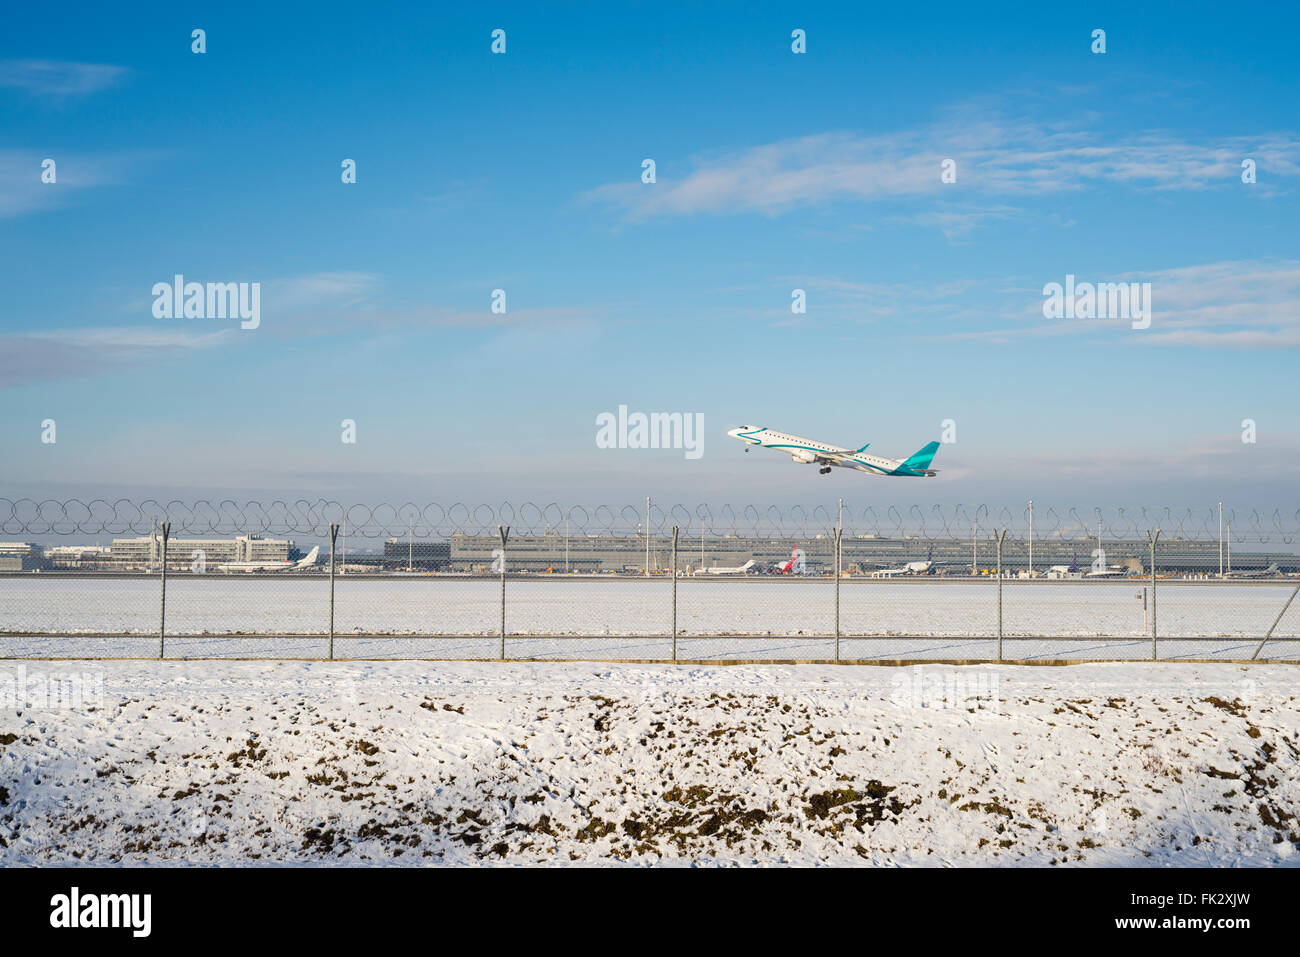 Embraer ERJ 195 airplane takes off at Munich Airport south runway on a sunny winter afternoon - all Logos removed Stock Photo